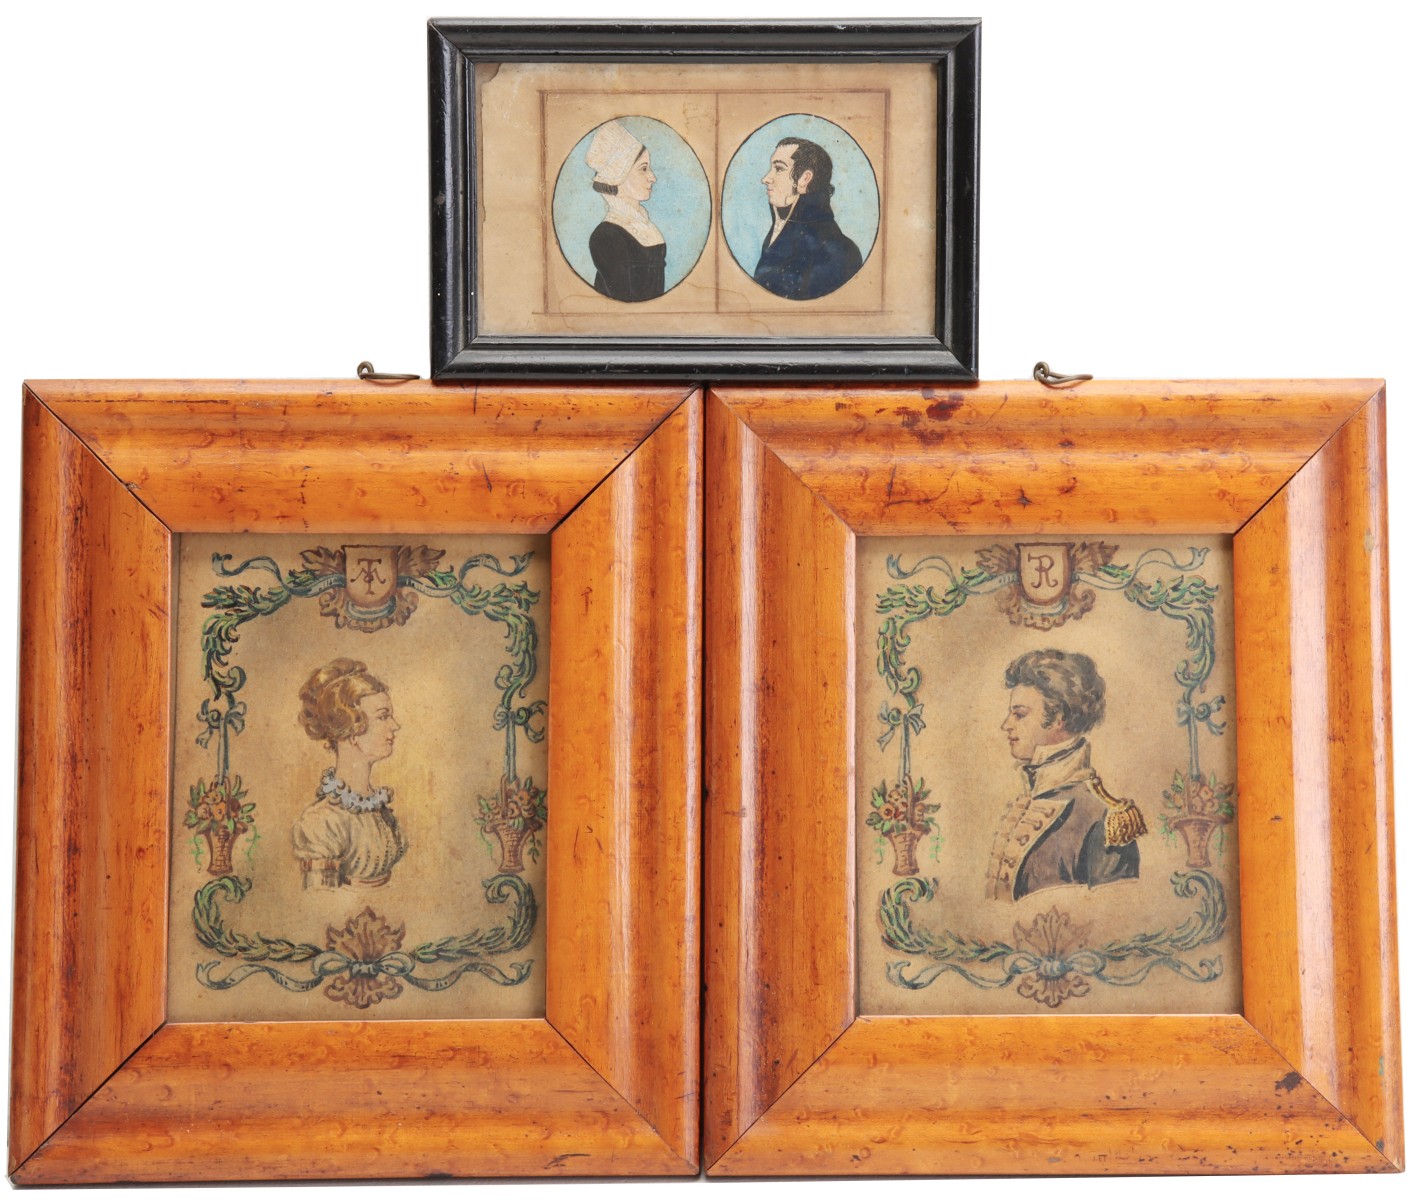 FRENCH AND GERMAN 19TH CENTURY PORTRAIT PAIRS